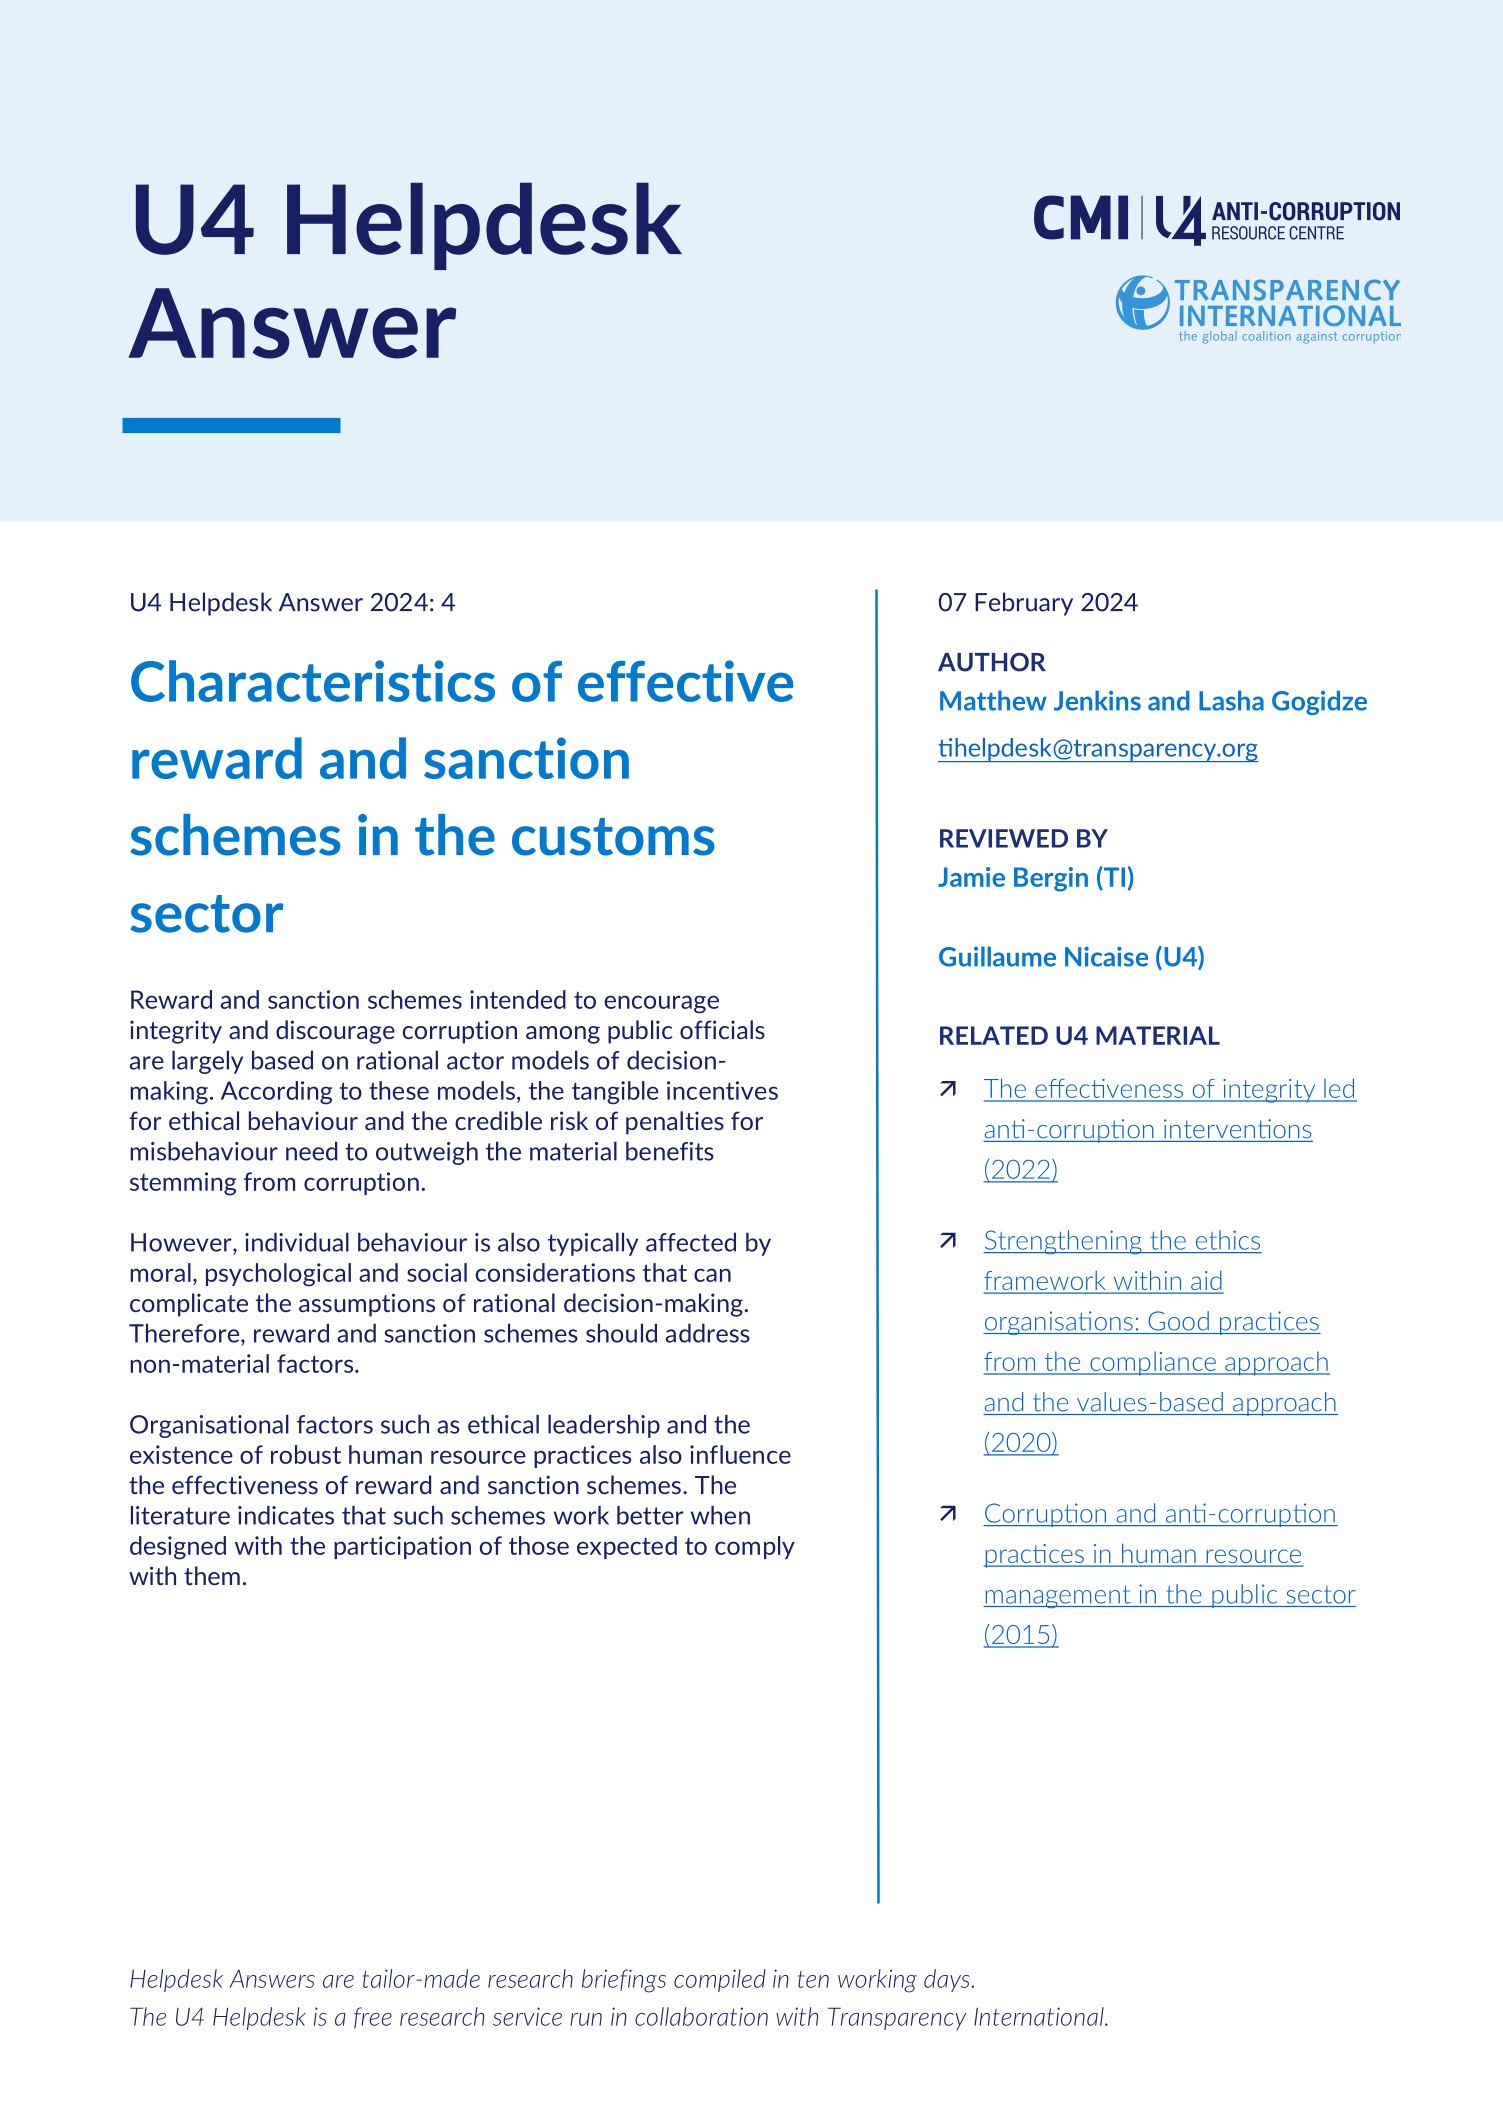 Characteristics of effective reward and sanction schemes in the customs sector